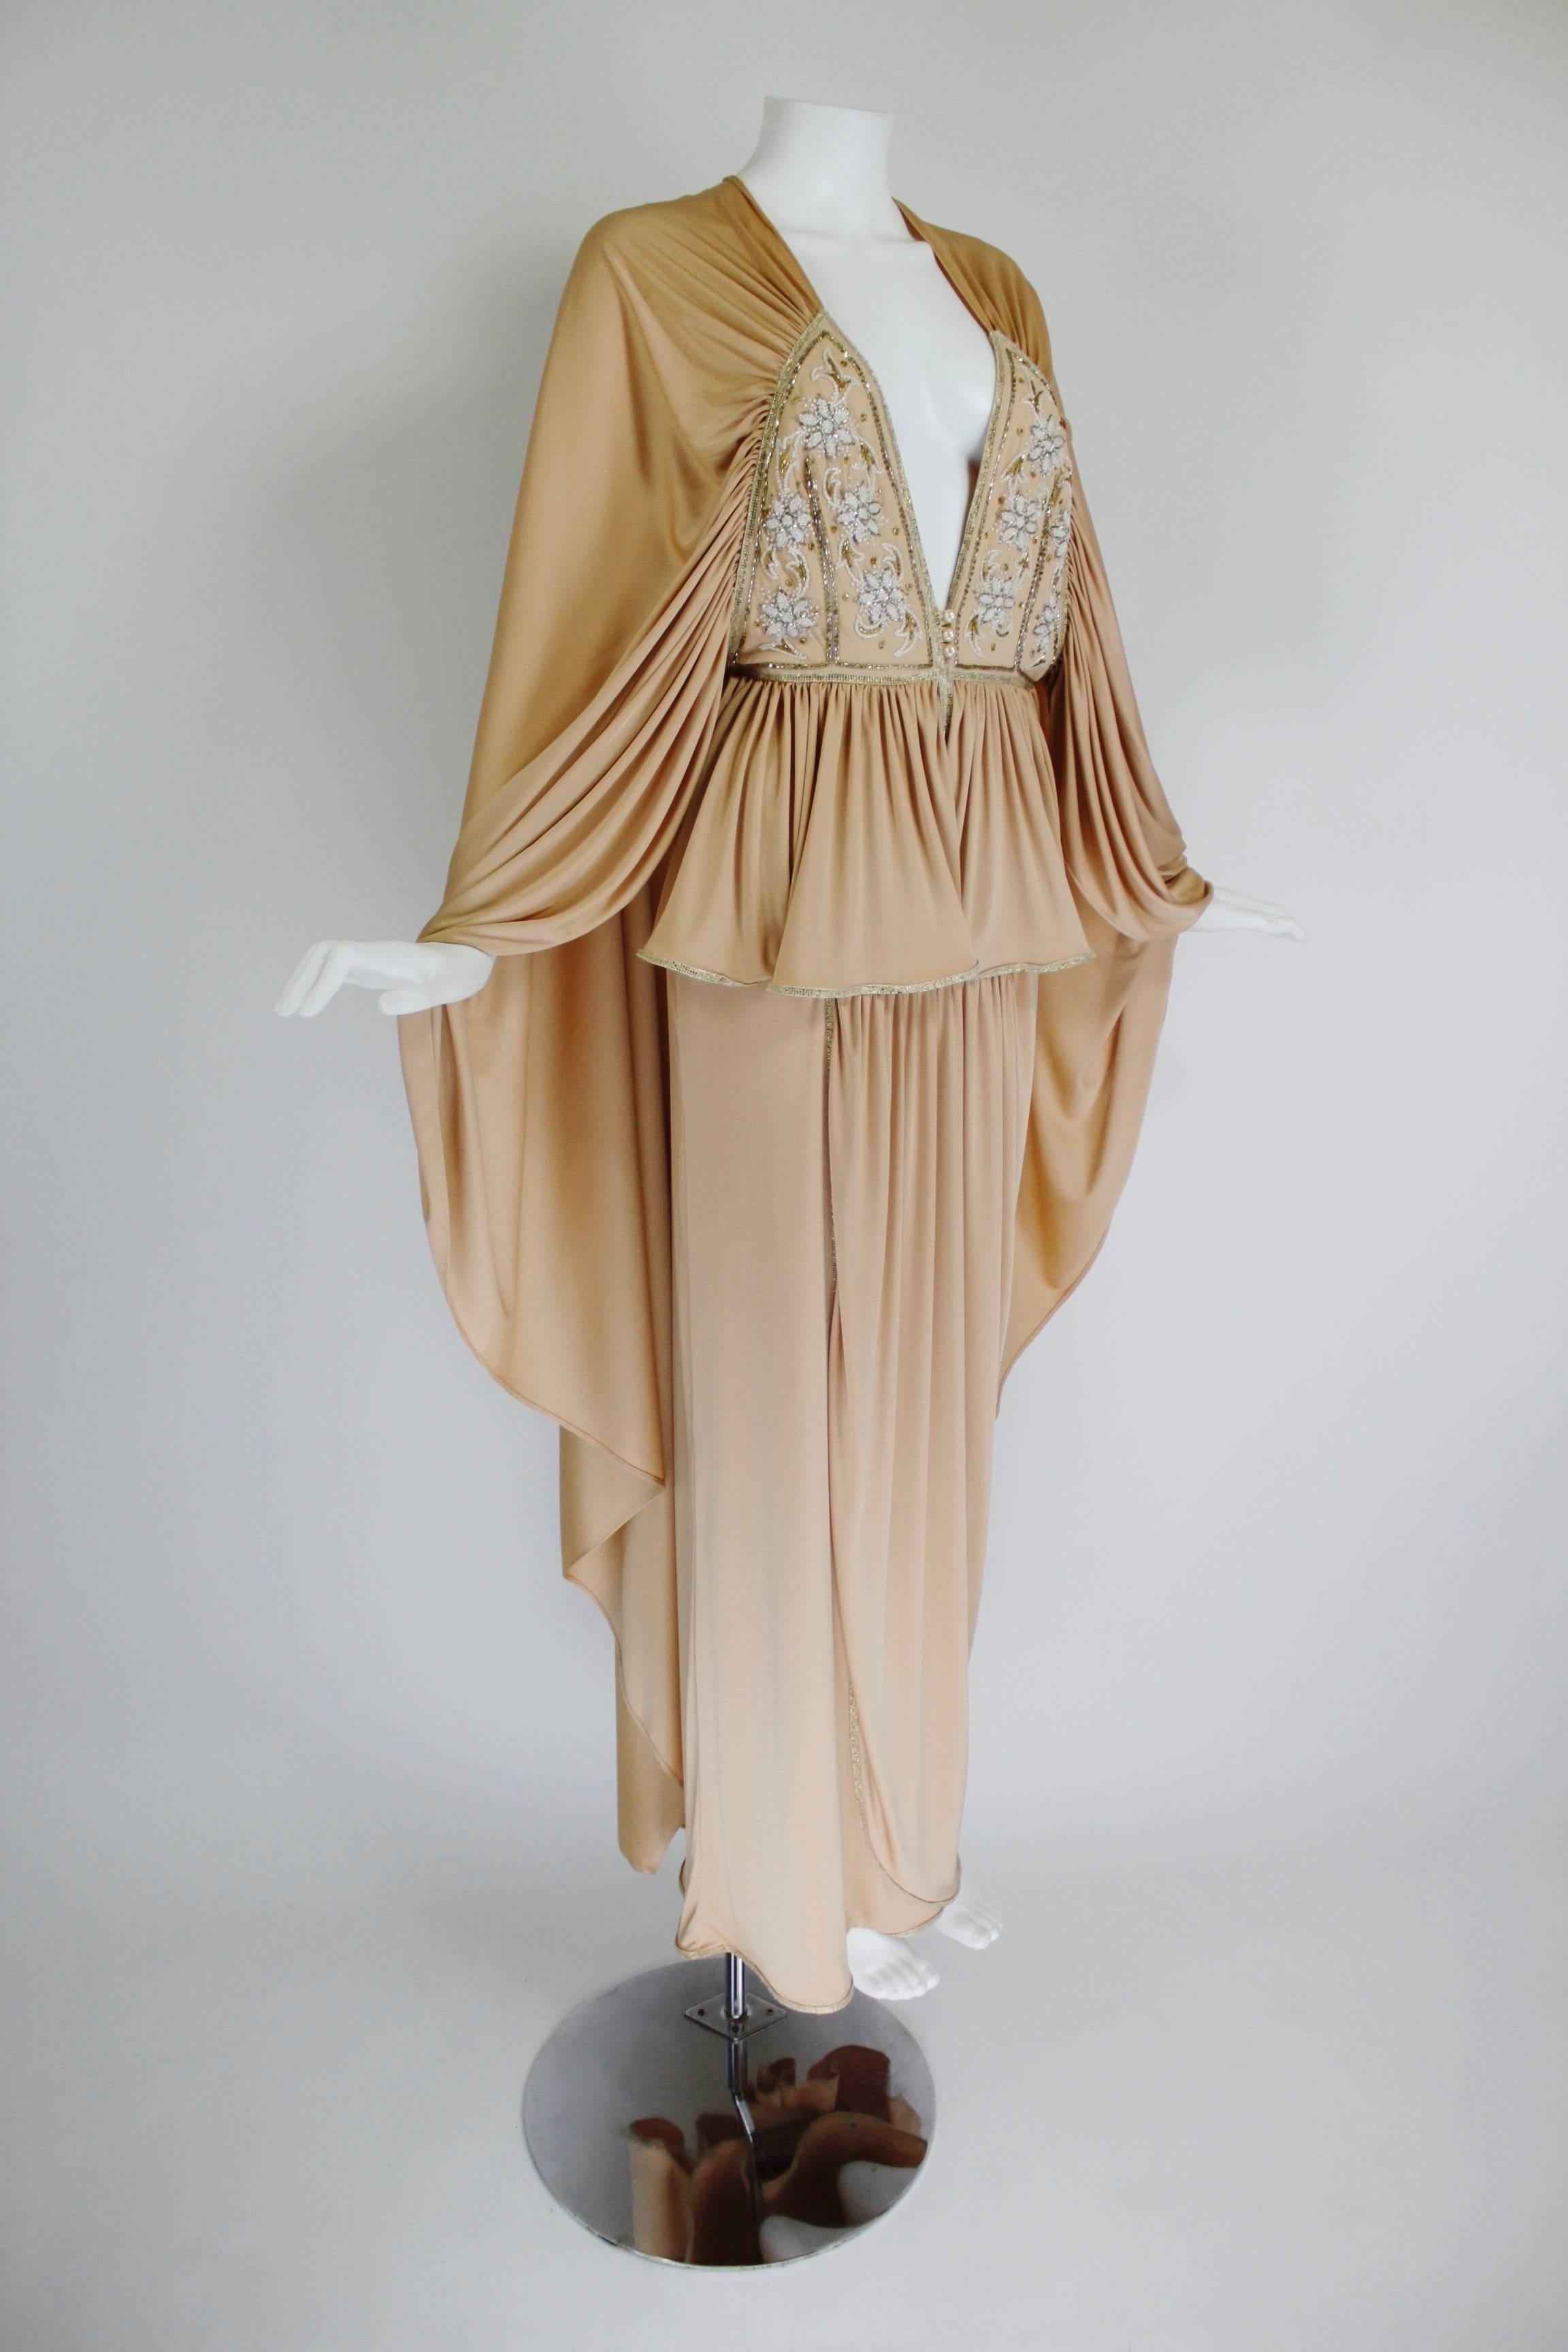 1970s Bill Gibb Ethereal Gown with Floral Beading and Plunging Neckline

*Please note that the fabric is solid nude/beige; because of lighting technicalities, in some images it appears ombré, but is in fact all one color (and rich in